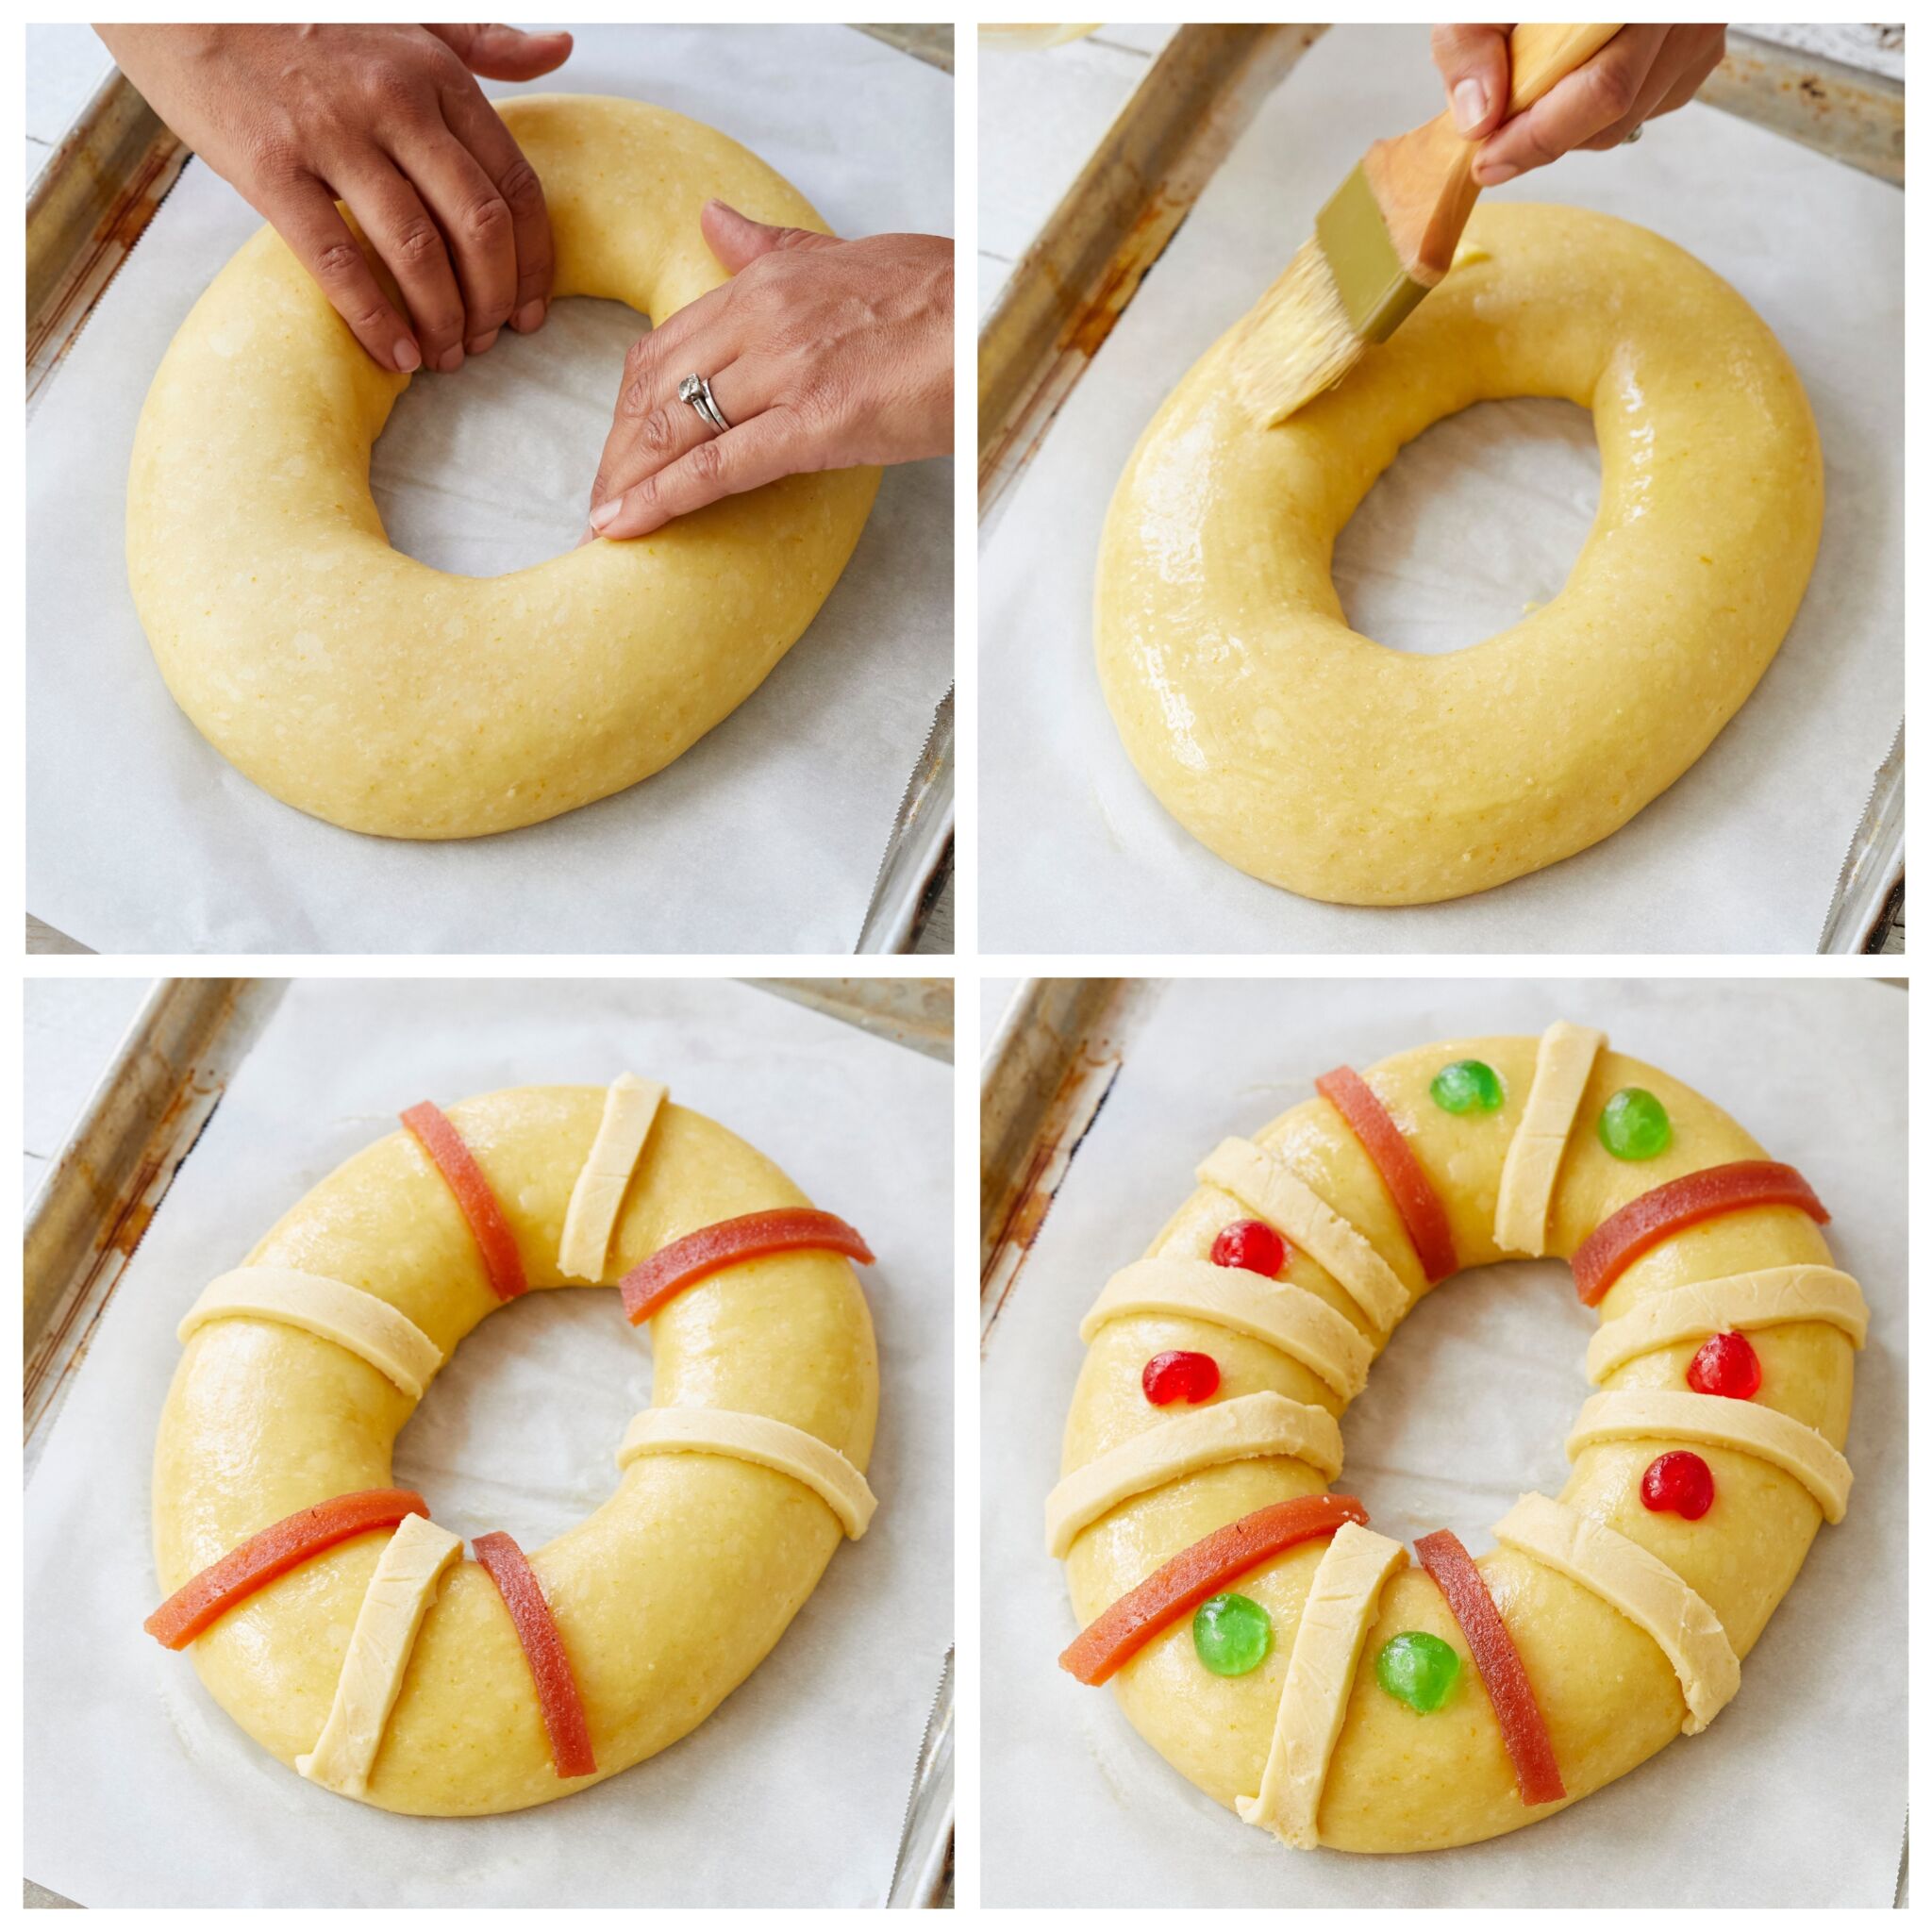 Step-by-step instruction on how to Make : Rosca de Reyes Recipe (Three Kings Bread) To shape the dough: Knead the dough into a ball and make a hole in the middle. Fashion the dough into an oval ring. Place on a parchment paper-lined baking sheet and let rise until doubled in size, about 45 minutes.